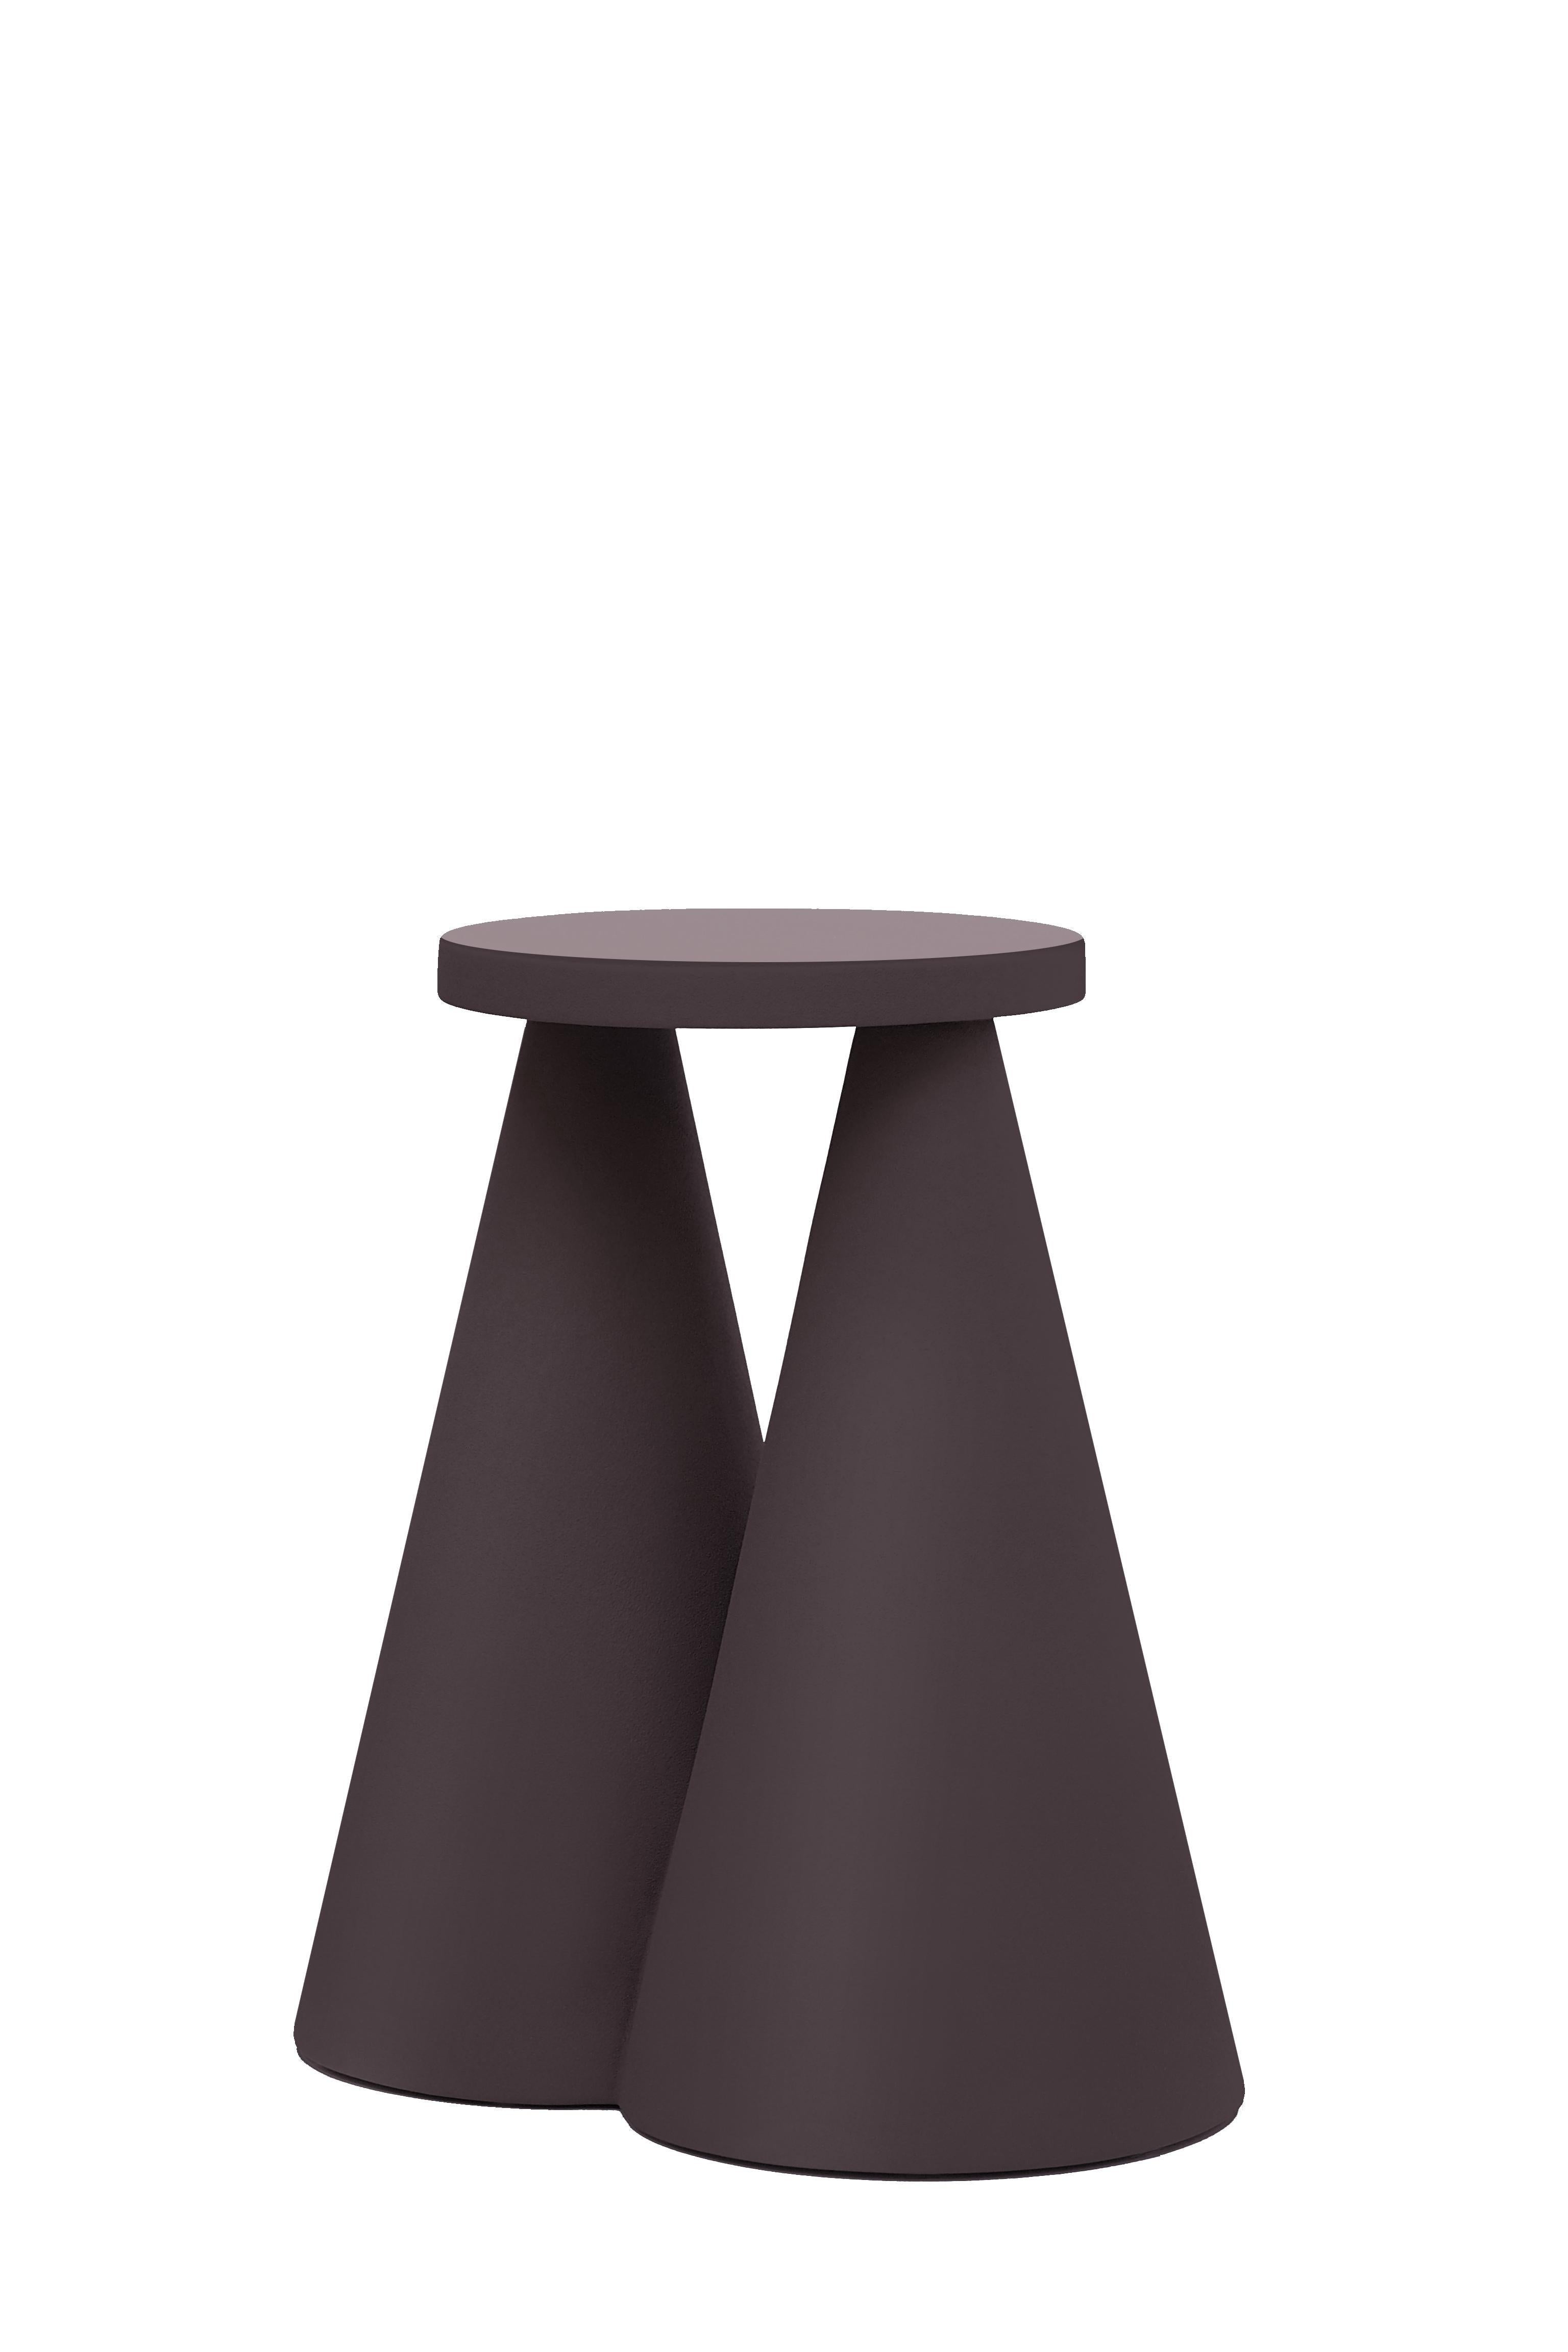 Pair of Isola Side Table by Cara Davide 1